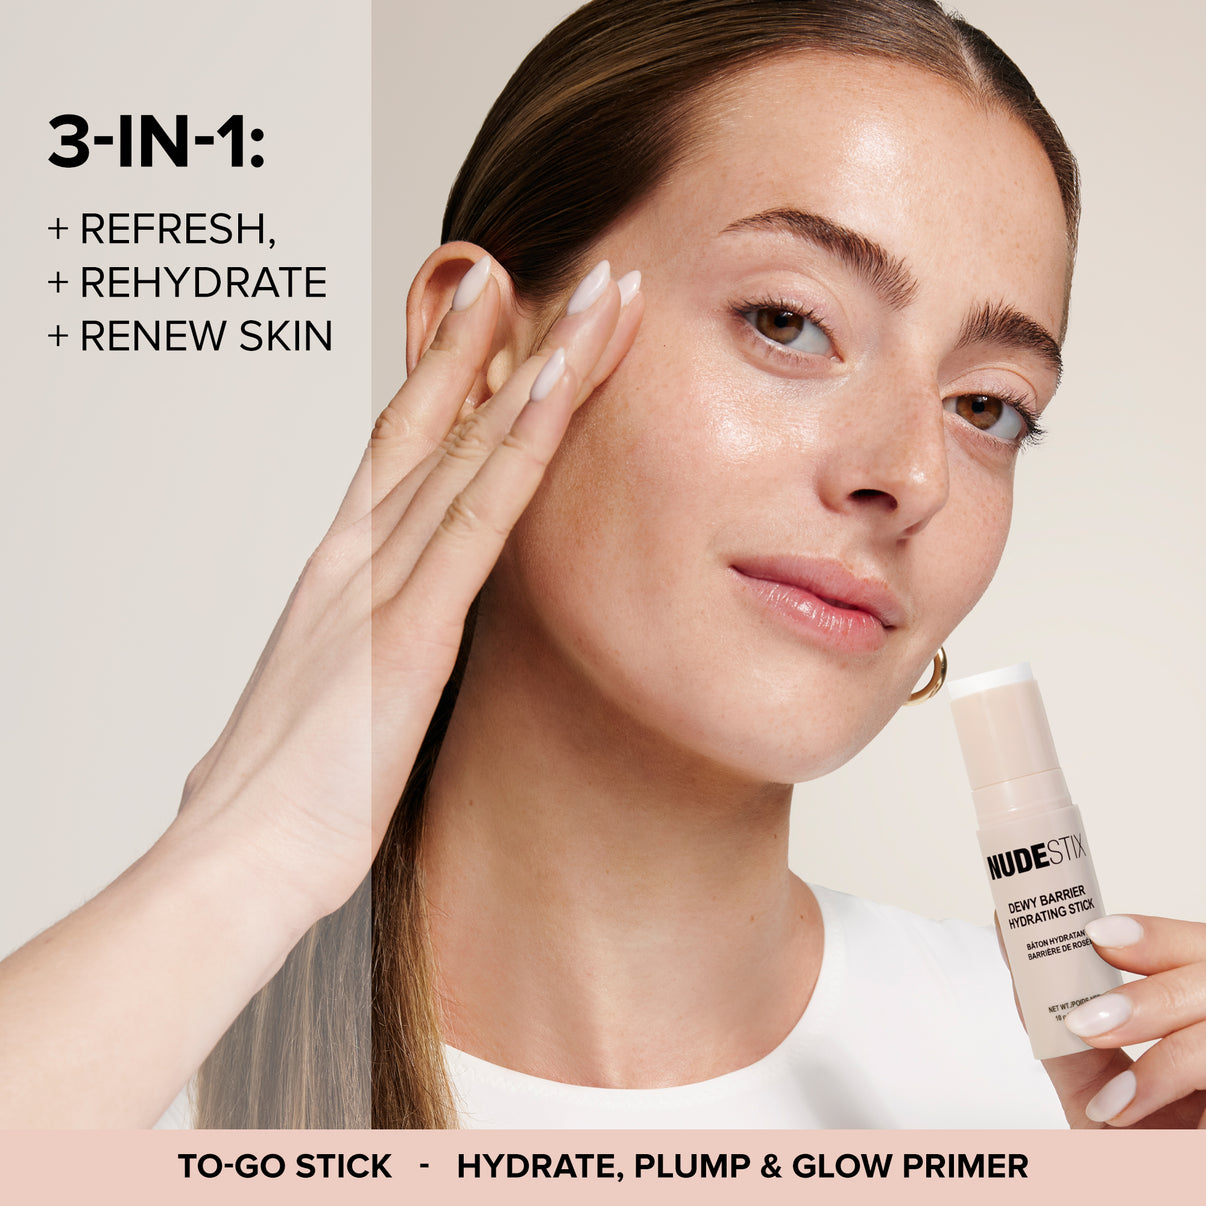 Dewy Barrier Hydrating To-Go Stick 3-in-1. Refresh, rehydrate and renew skin